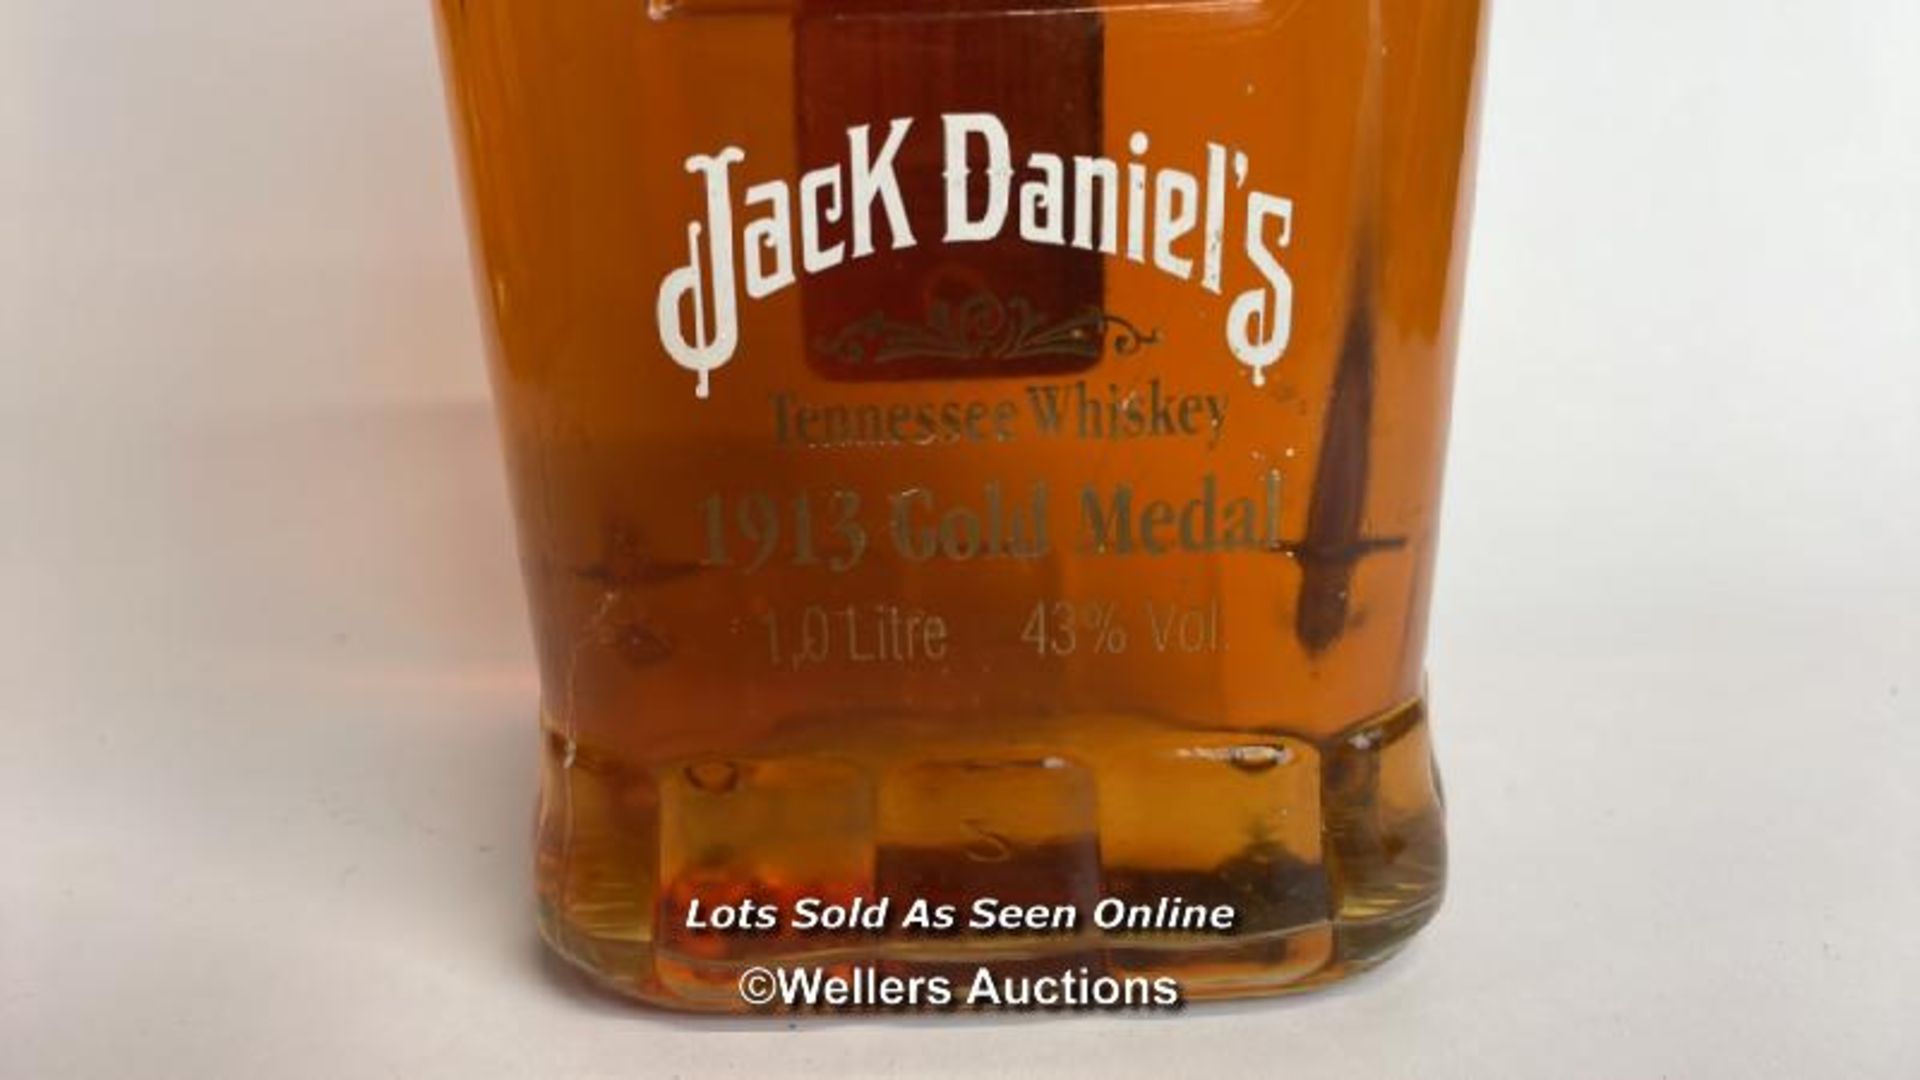 1913 Jack Daniels Tennesse Whiskey Gold Medal, 75cl, 43% vol / Please see images for fill level - Image 2 of 6